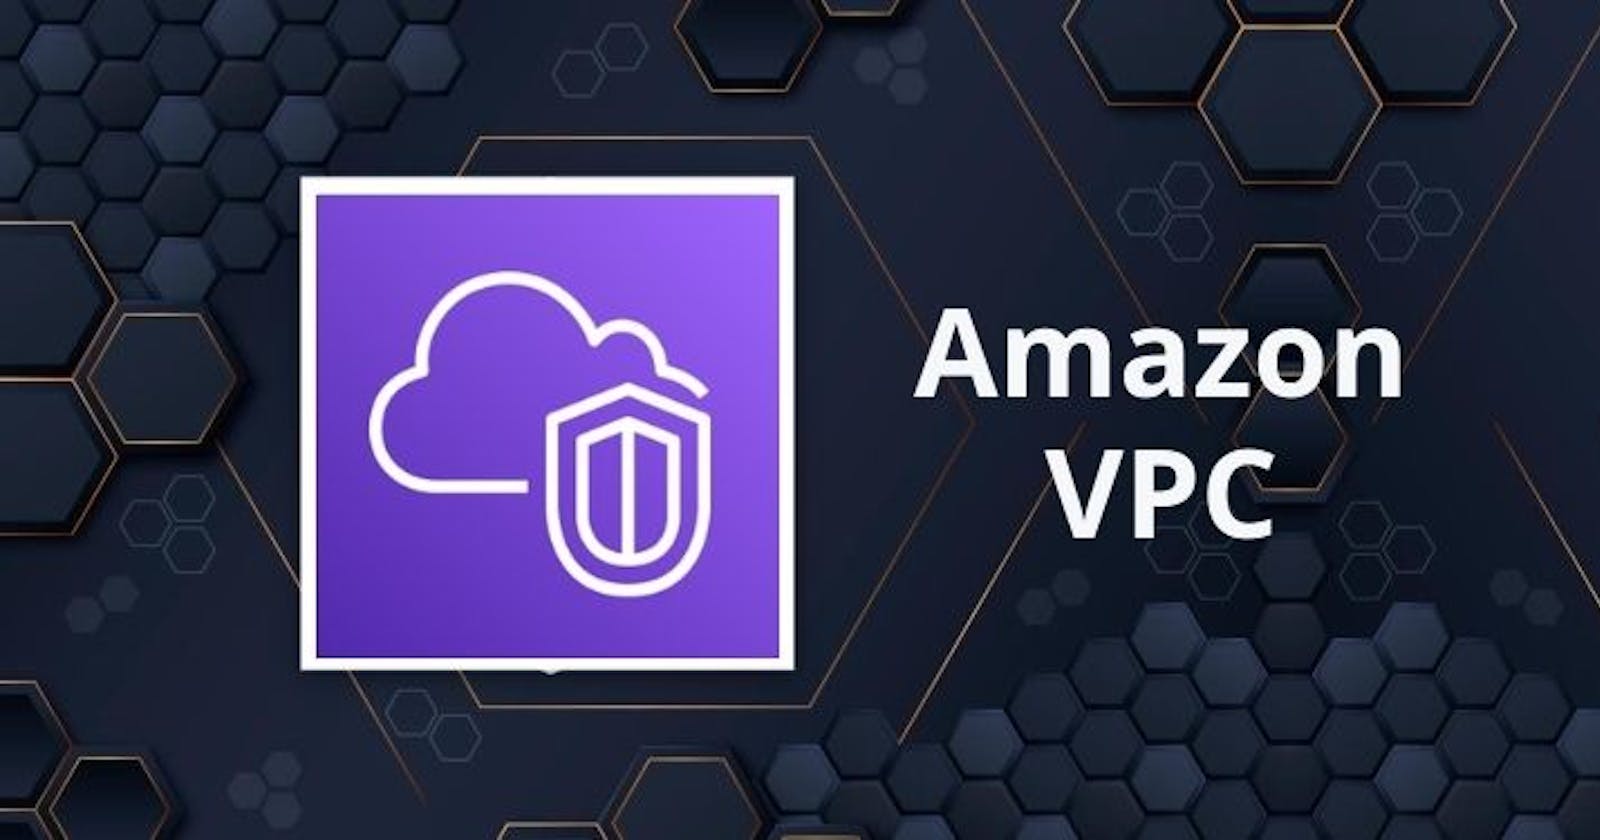 Brief About Amazon VPC :